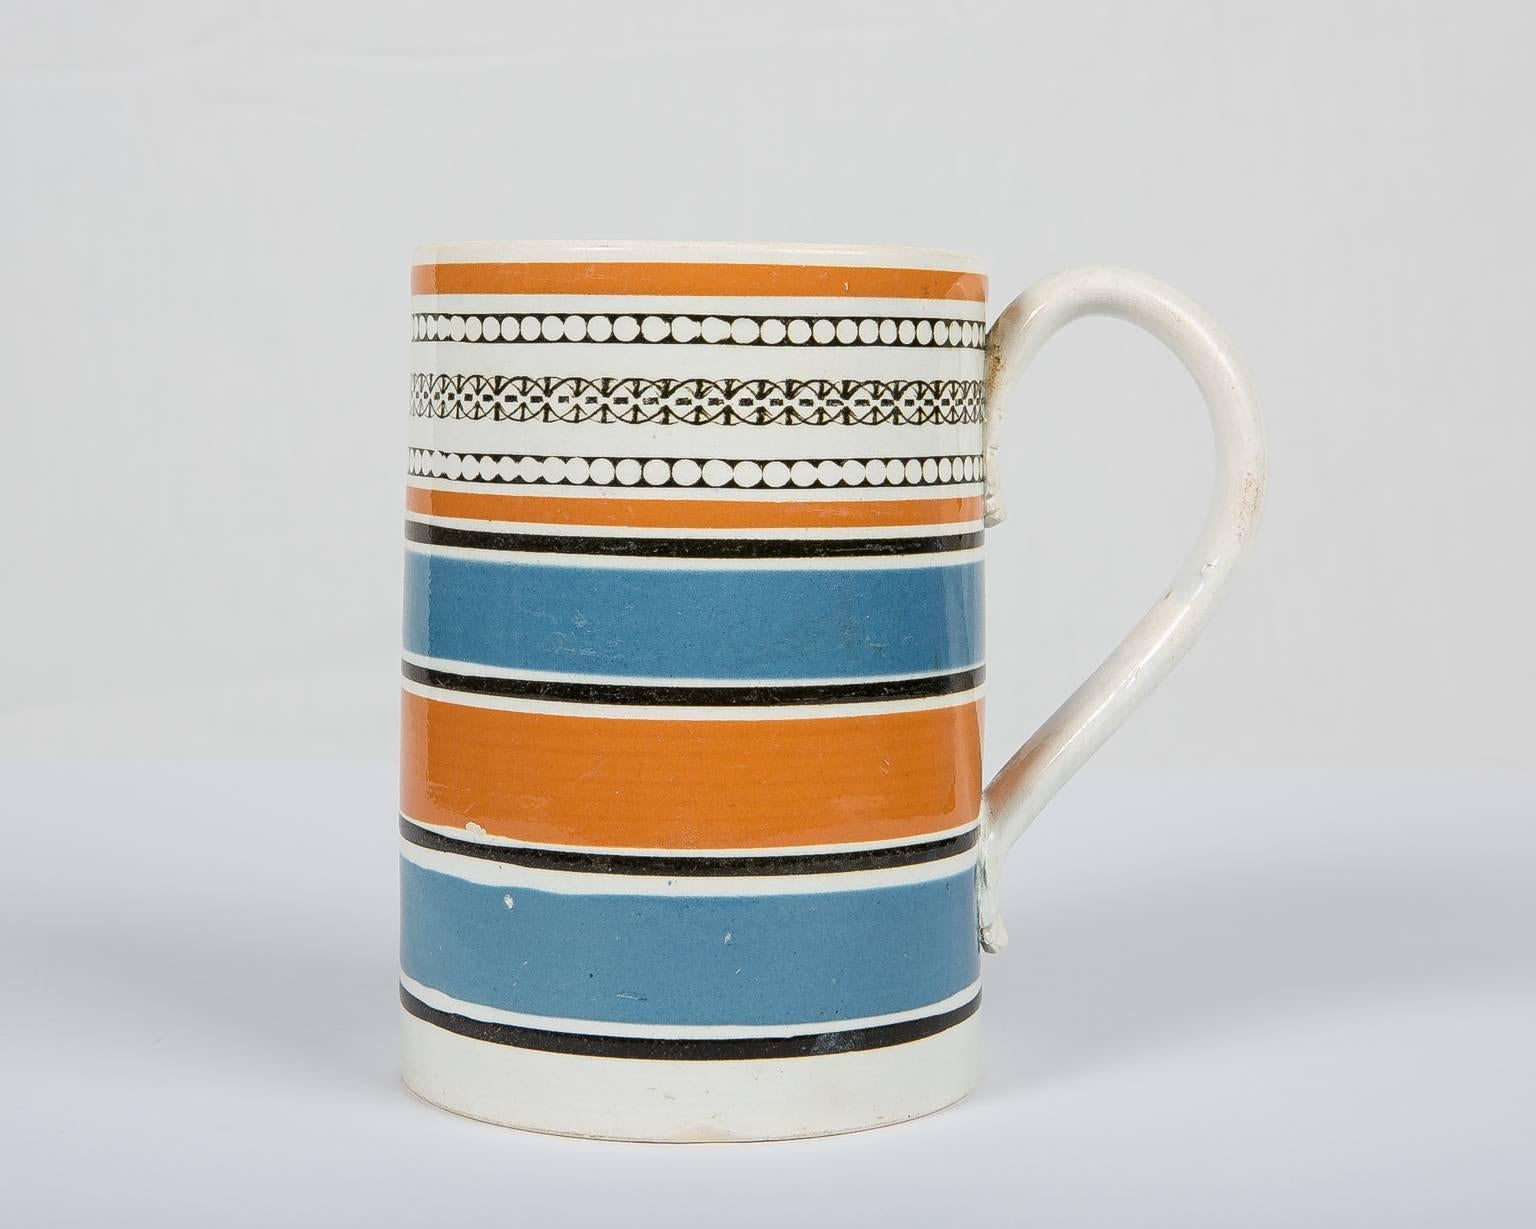 A handsome antique Mochaware quart mug or tankard that is wider at the bottom and slightly tapers as it goes up. Made in England, circa 1820, this mug was decorated with slip in broad machine-turned bands of orange and blue. The top of the tankard